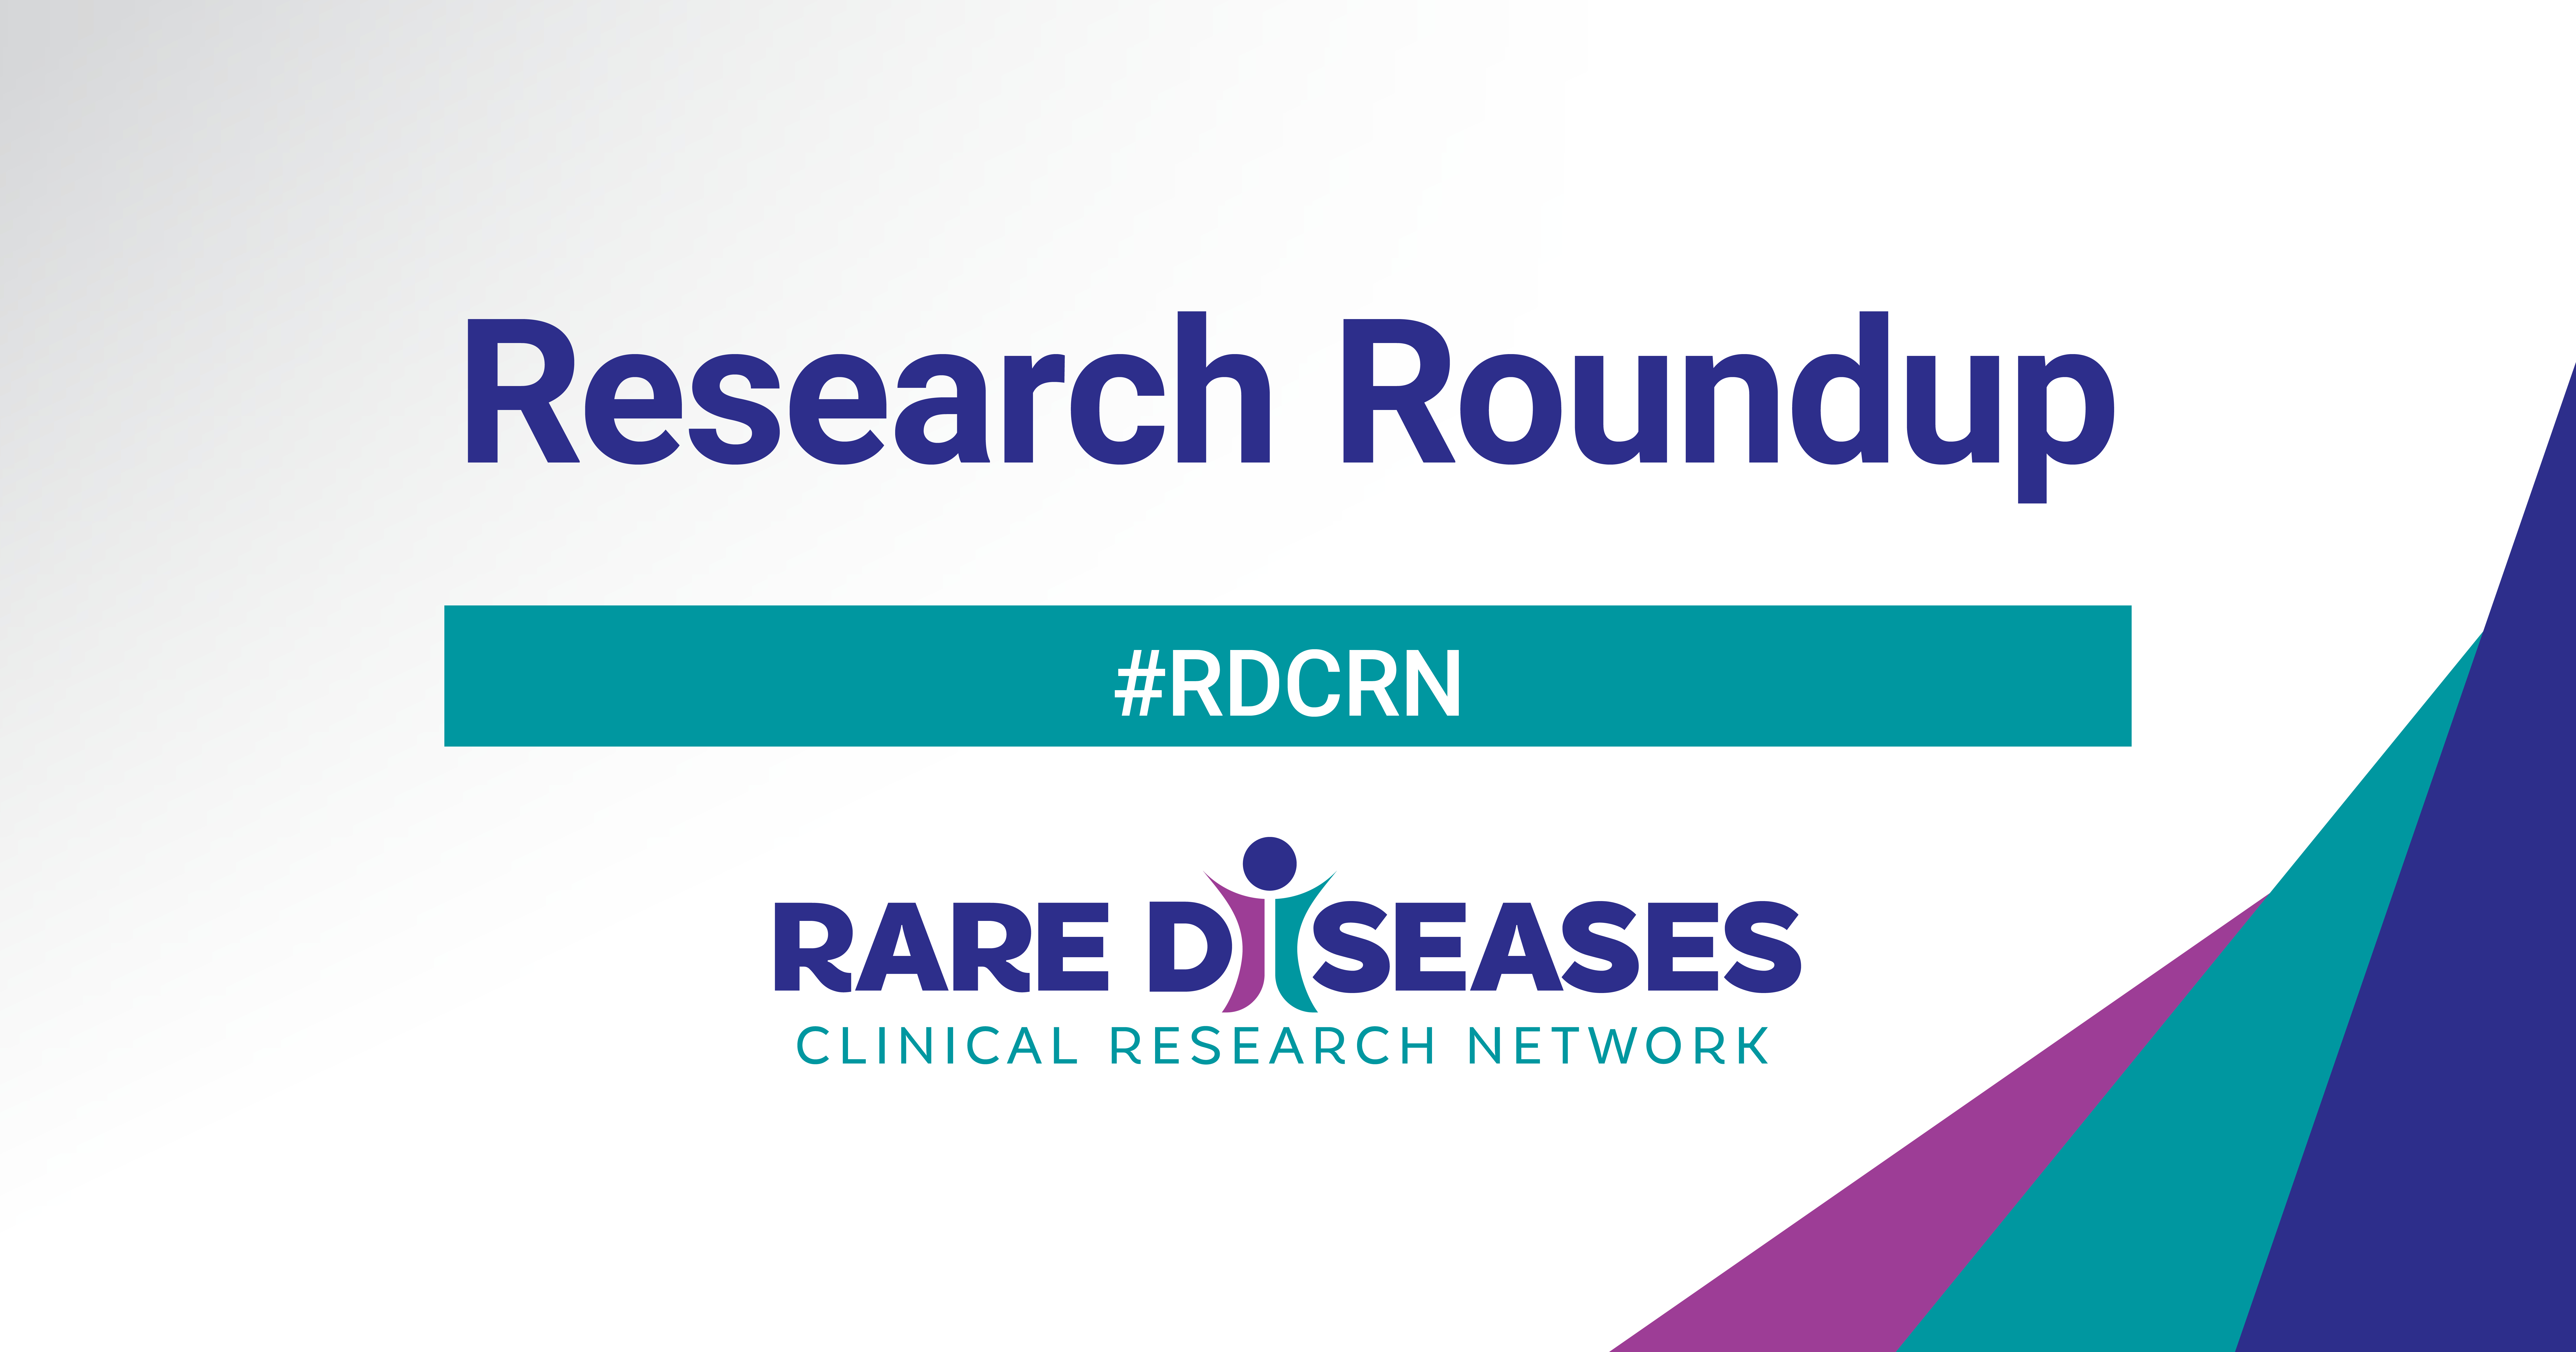 Rare Diseases Clinical Research Network logo with text: Research Roundup, #RDCRN